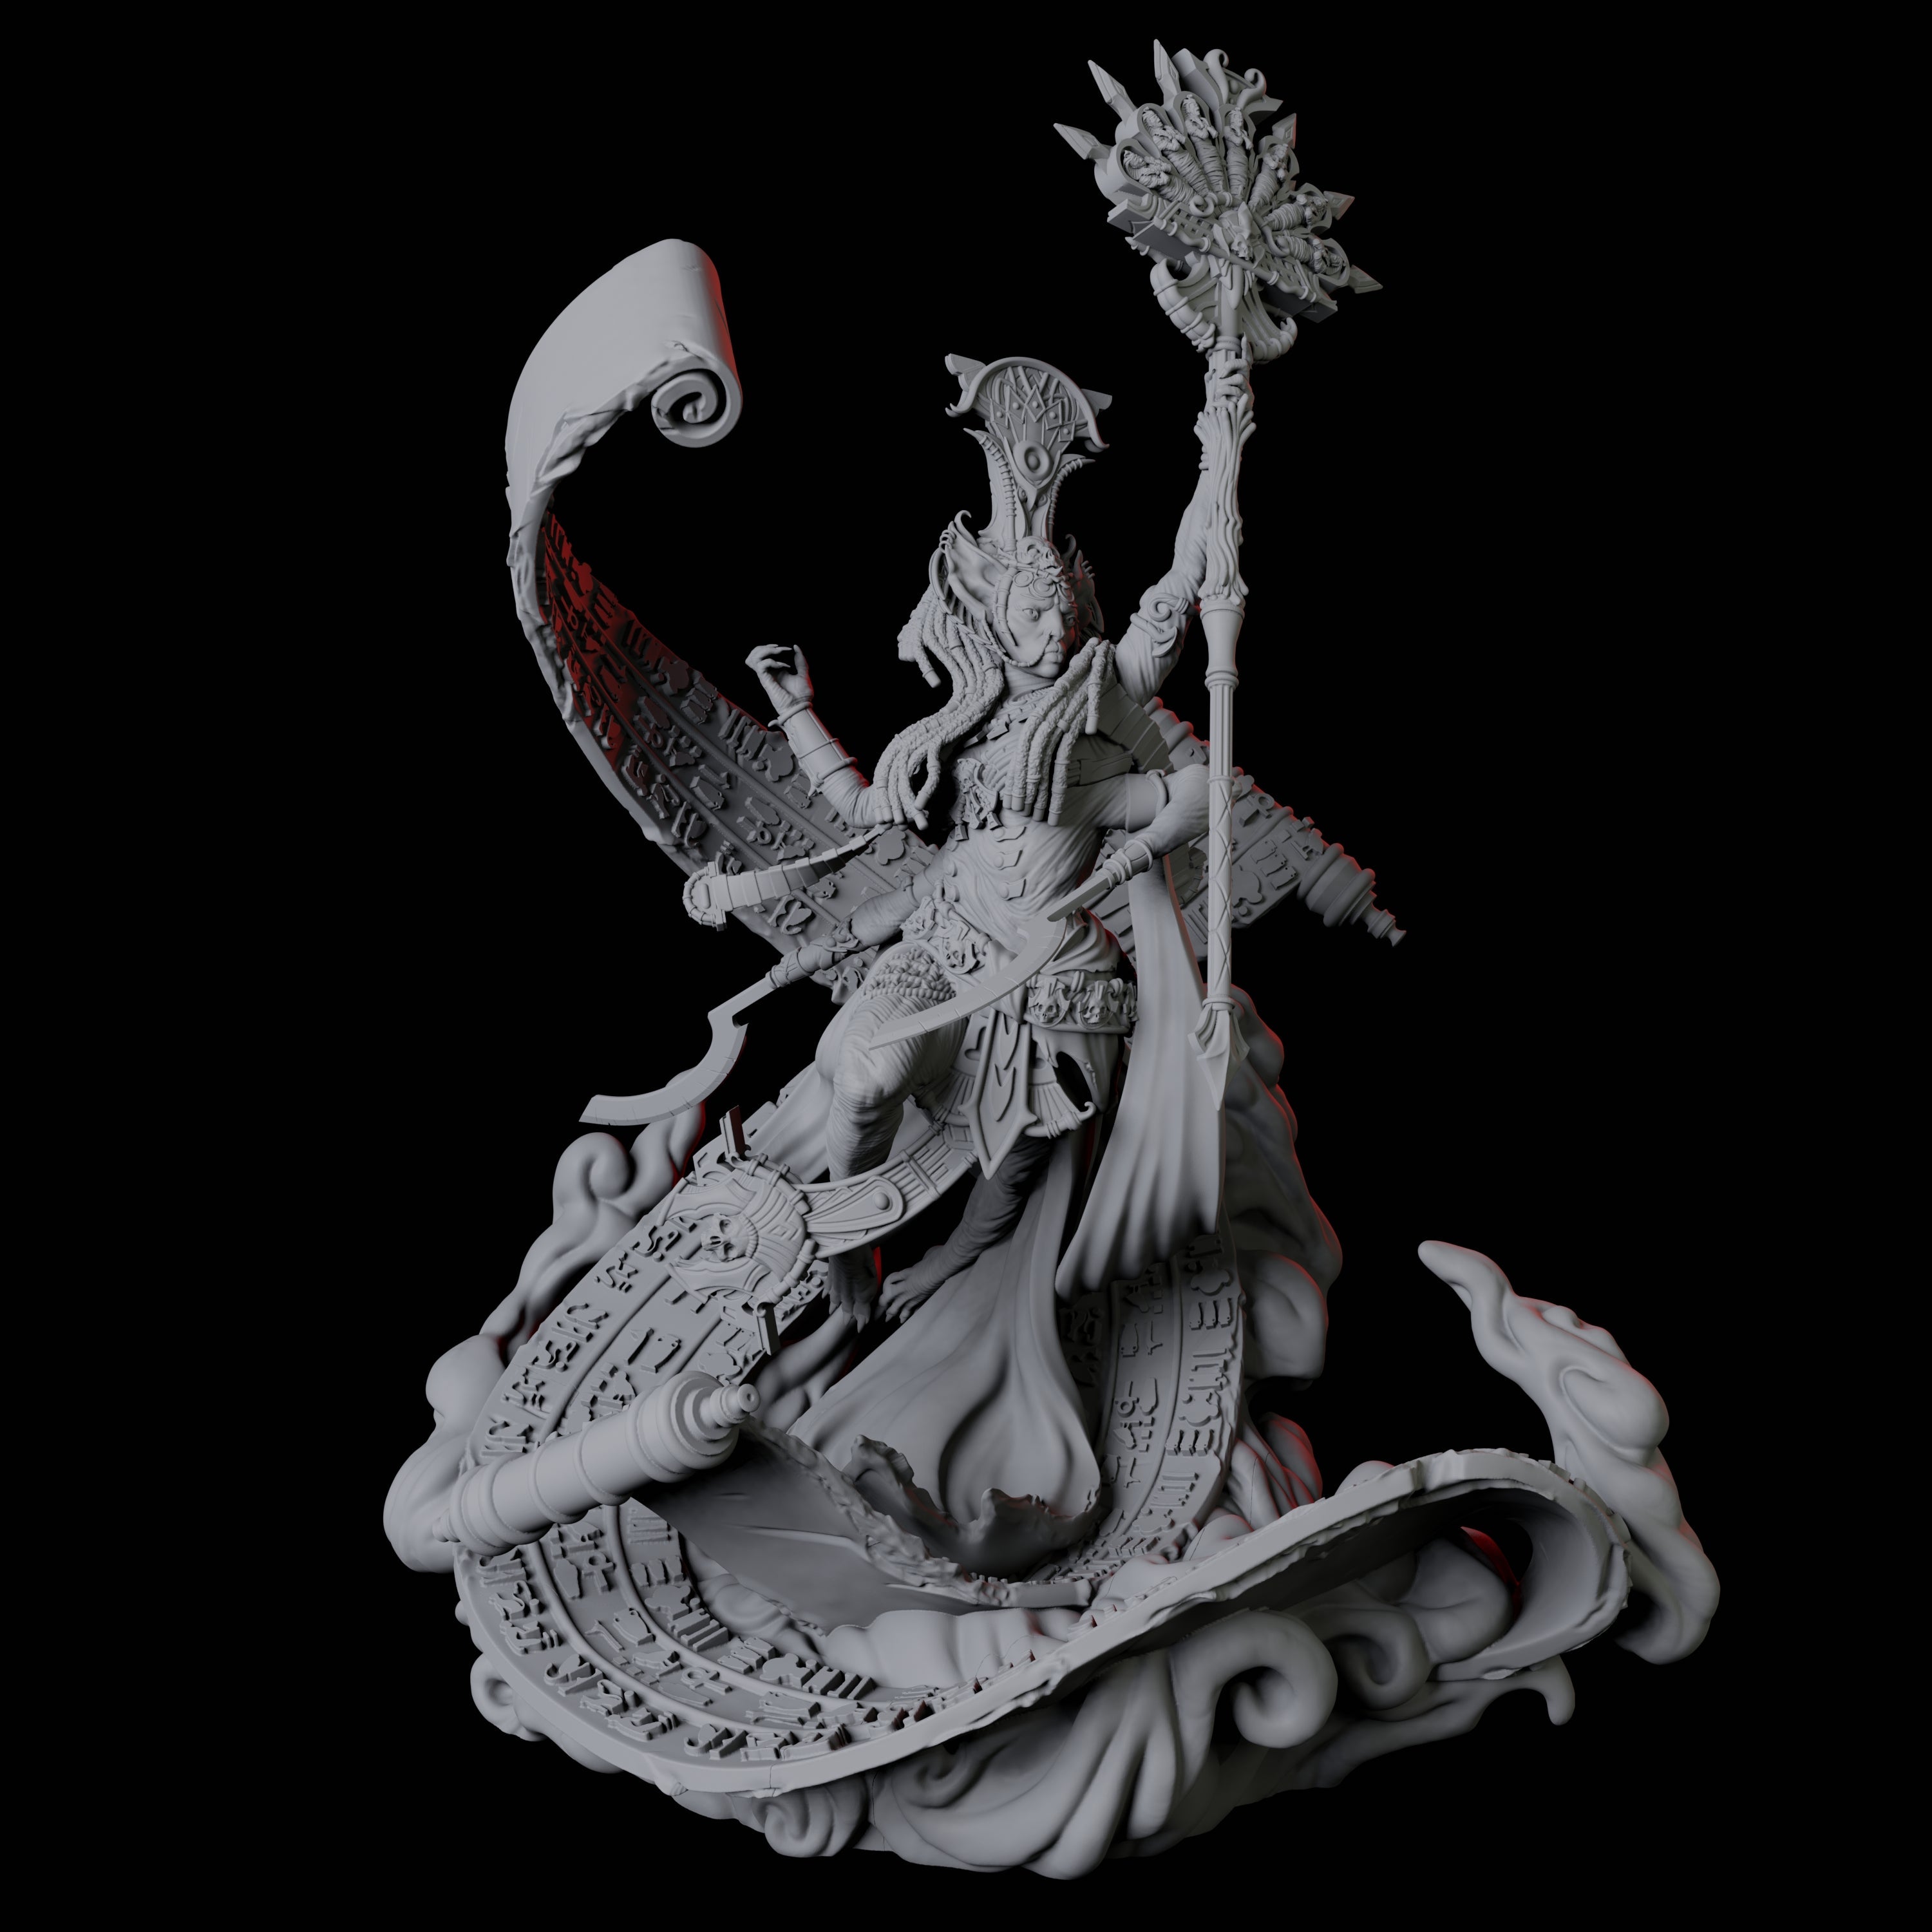 Multi-Armed Sorcerer Queen Miniature for Dungeons and Dragons, Pathfinder or other TTRPGs